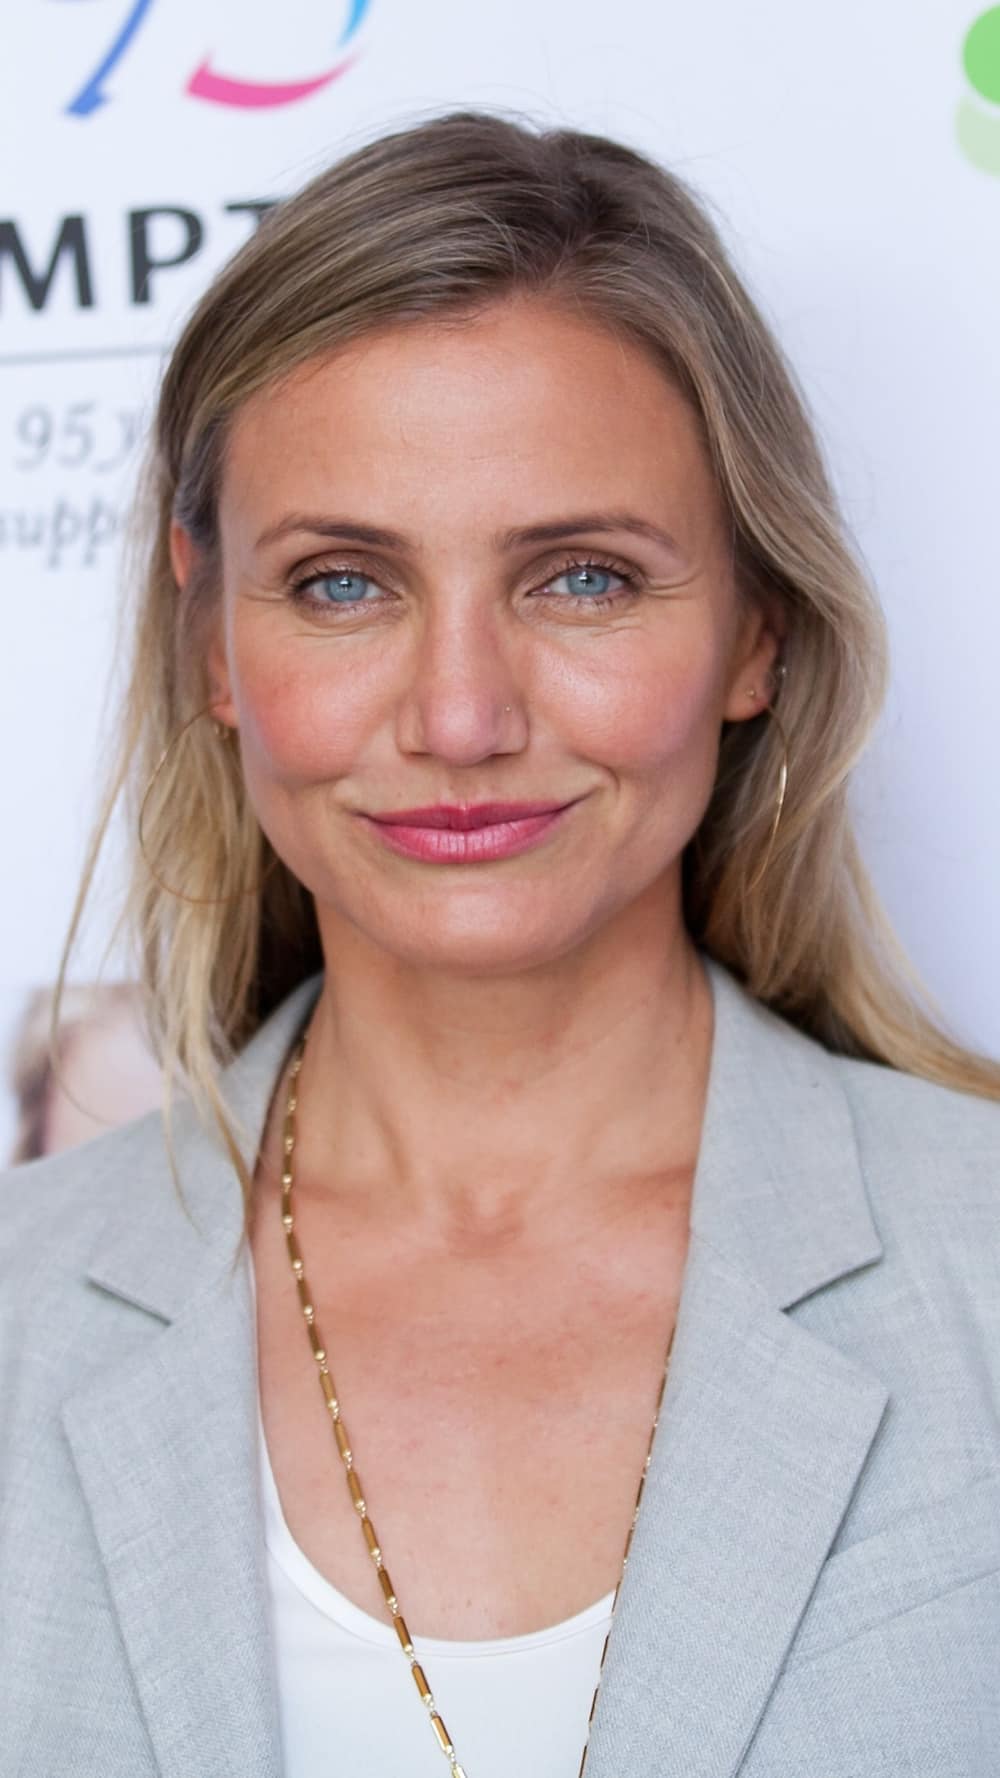 Actress Cameron Diaz is taking a pause on her acting career to take care of her new born baby. Photo credit: Getty images.